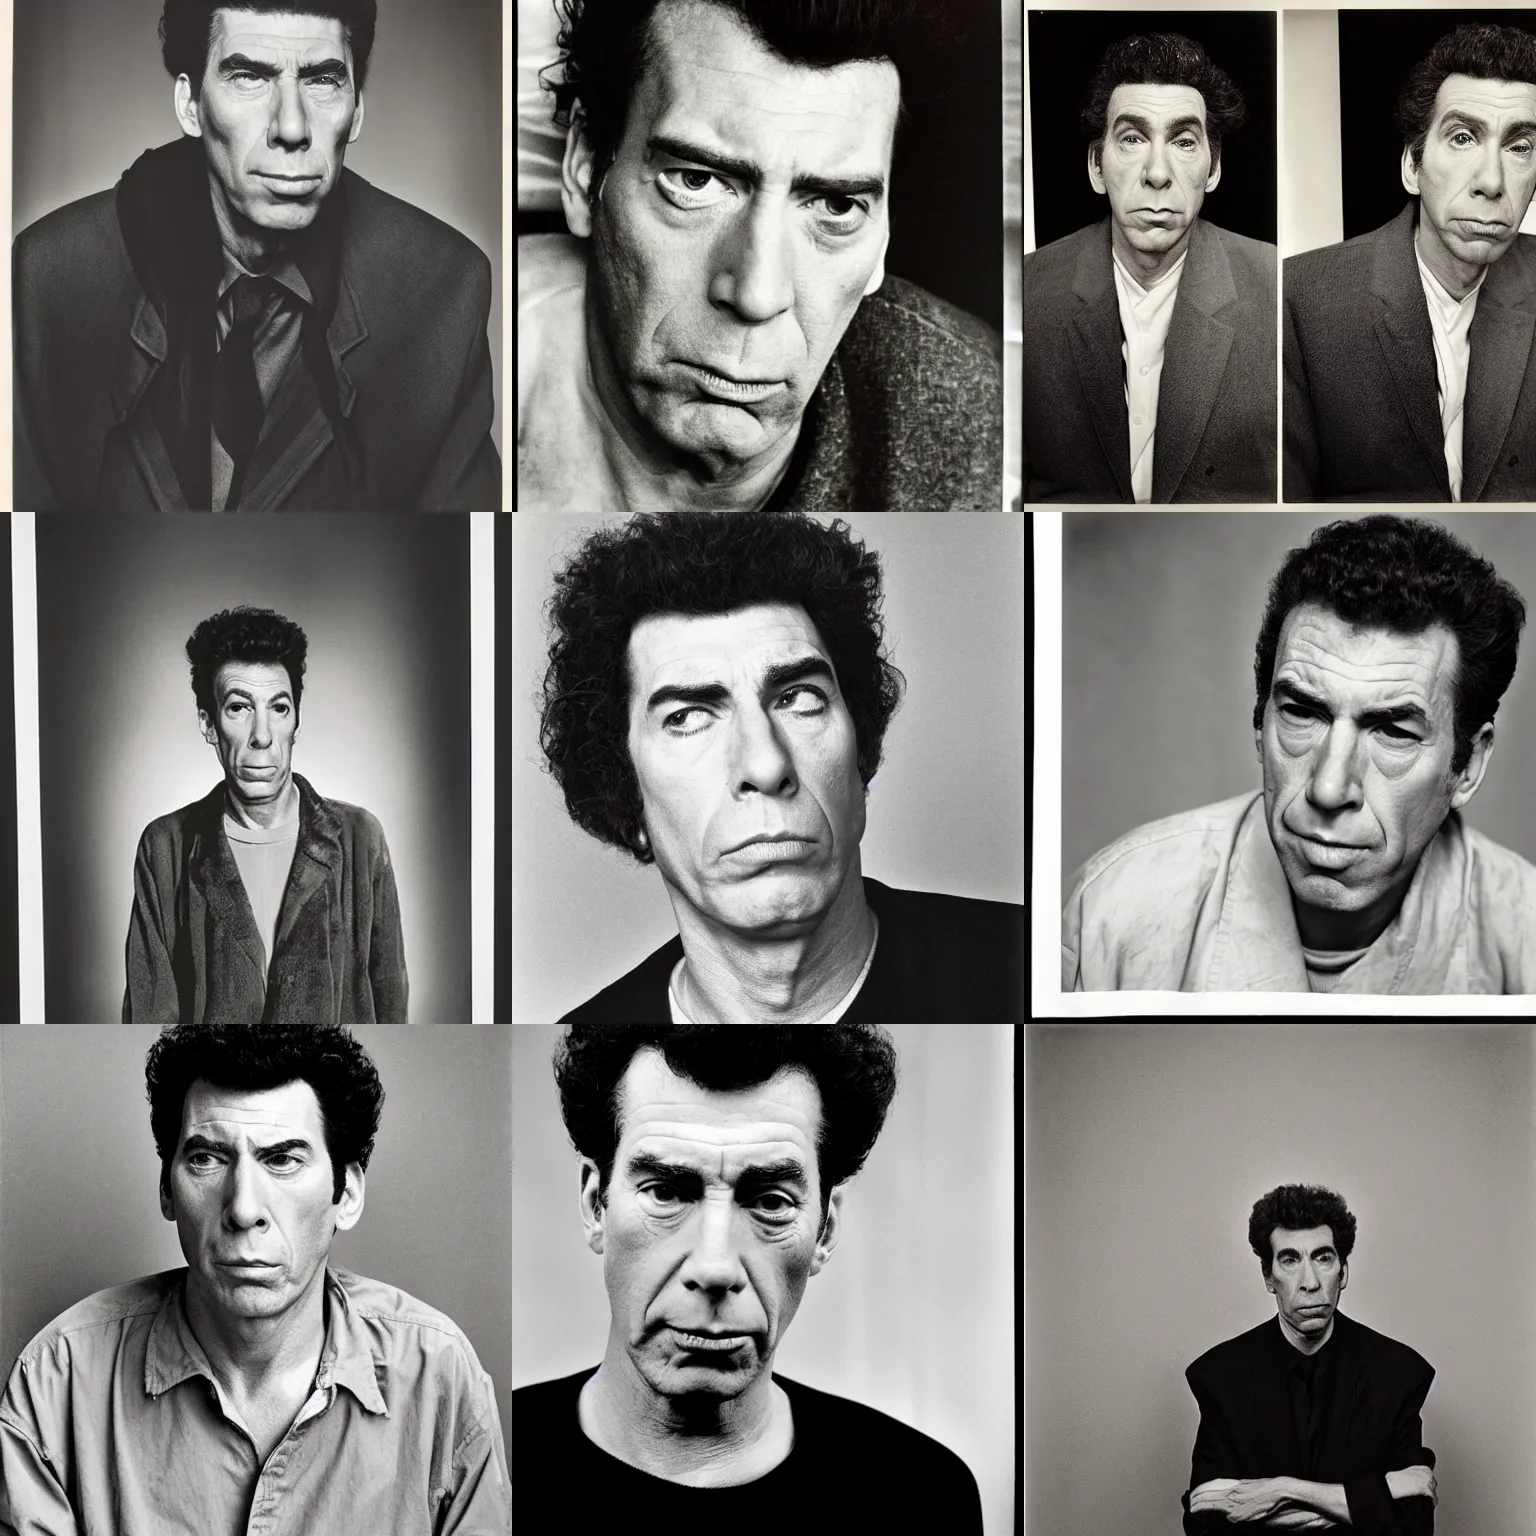 a portrait of kramer from seinfeld by paul strand and | Stable ...